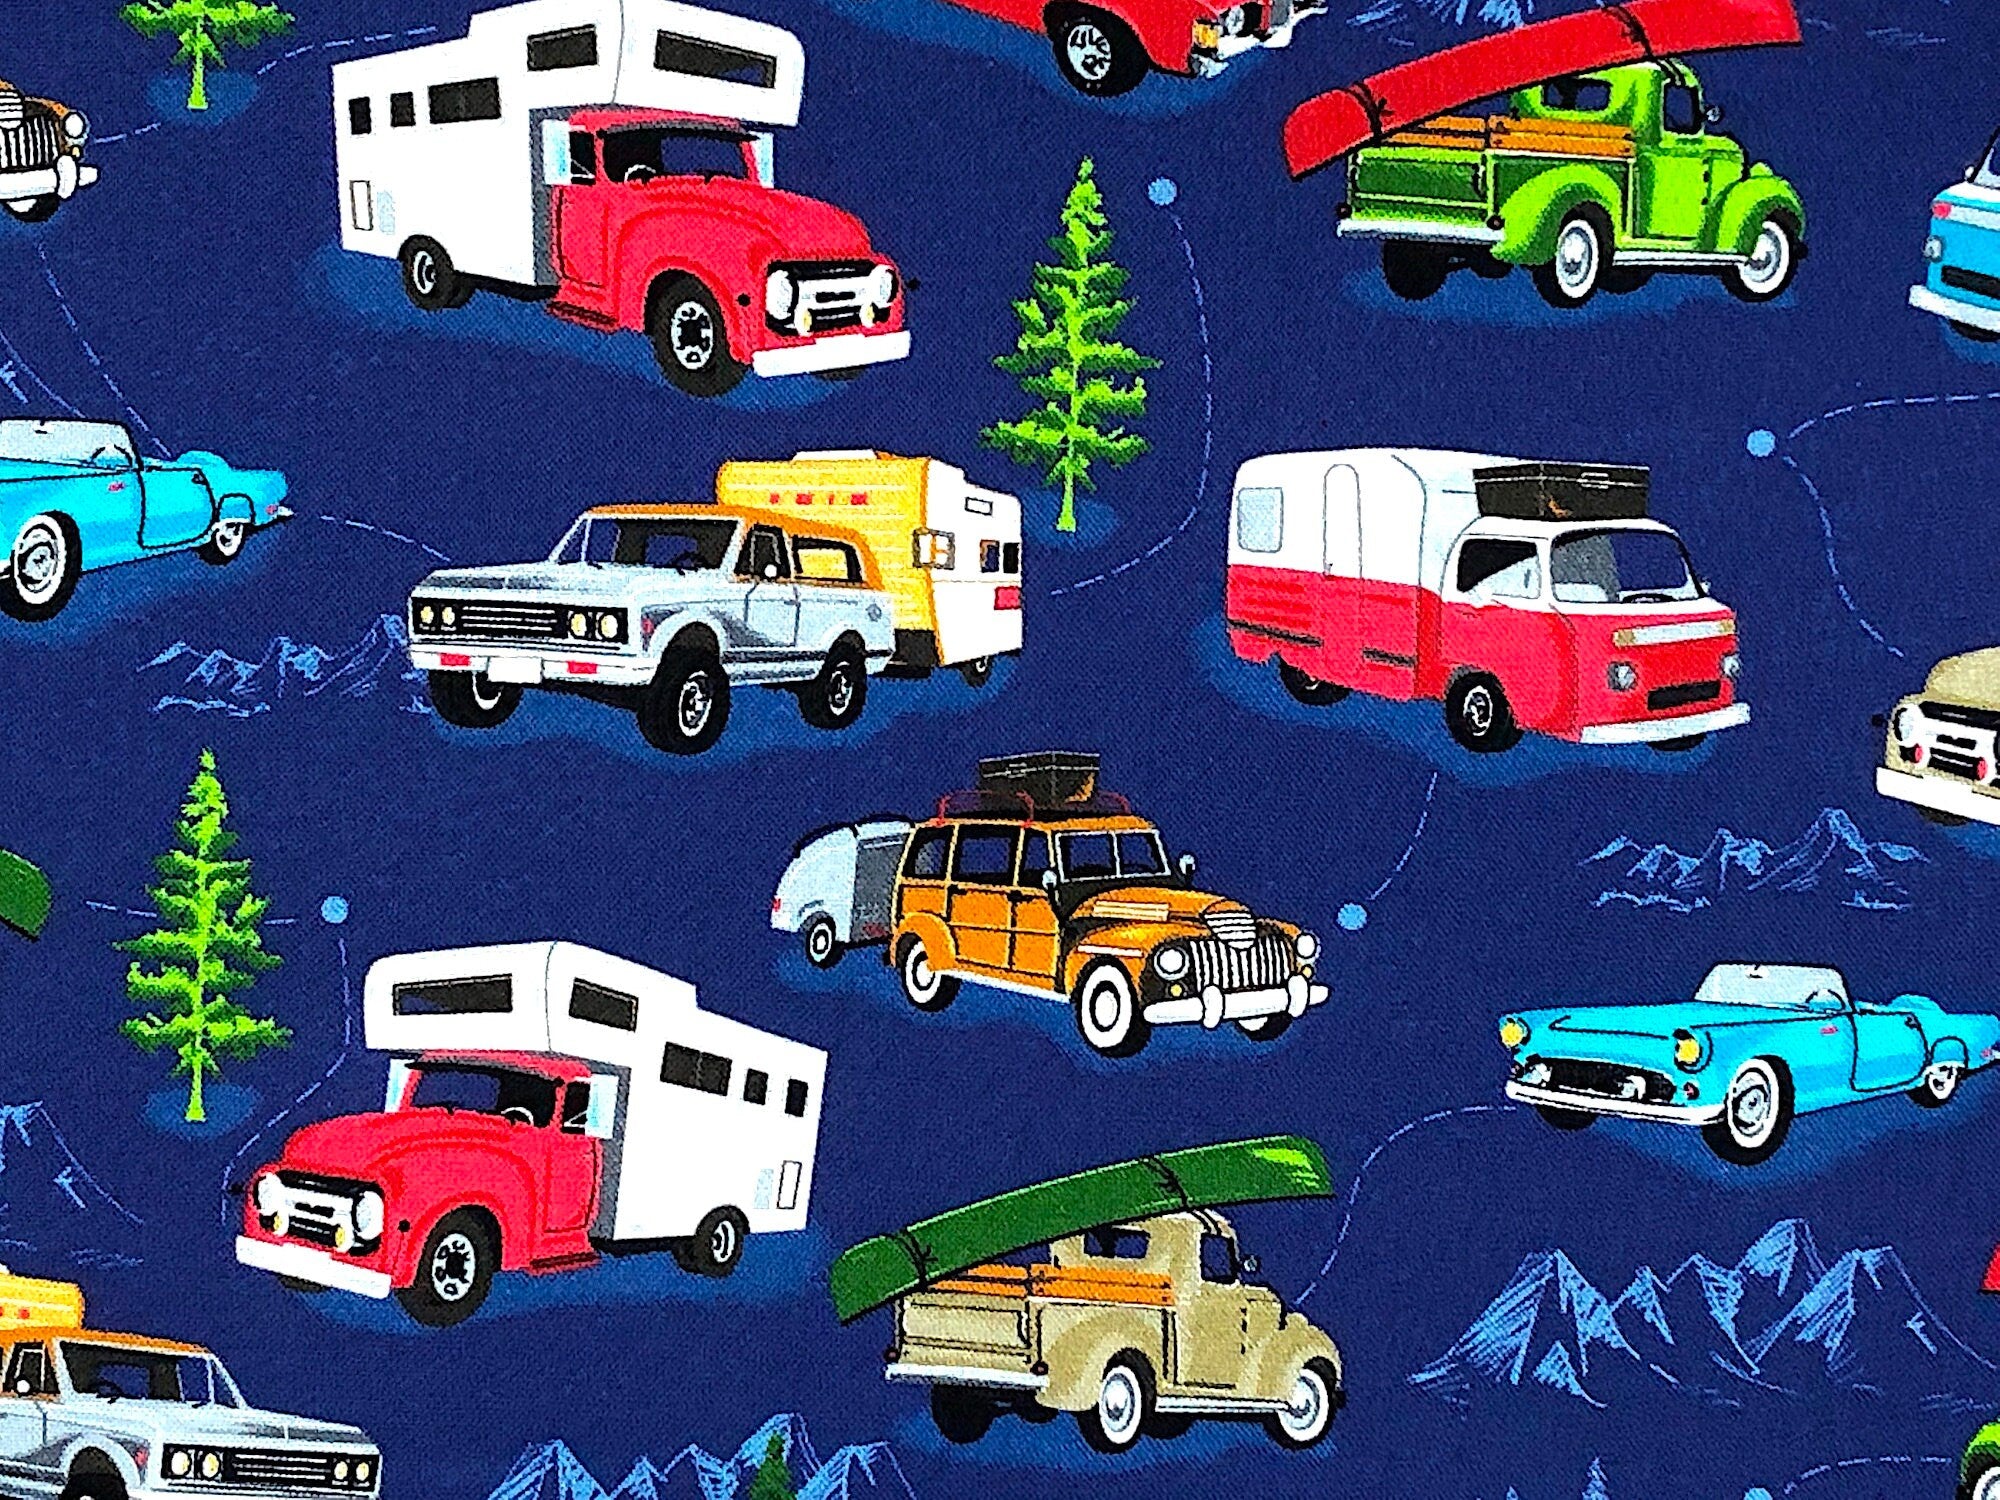 Close up of a truck pulling a travel trailer, cards, trees and more.